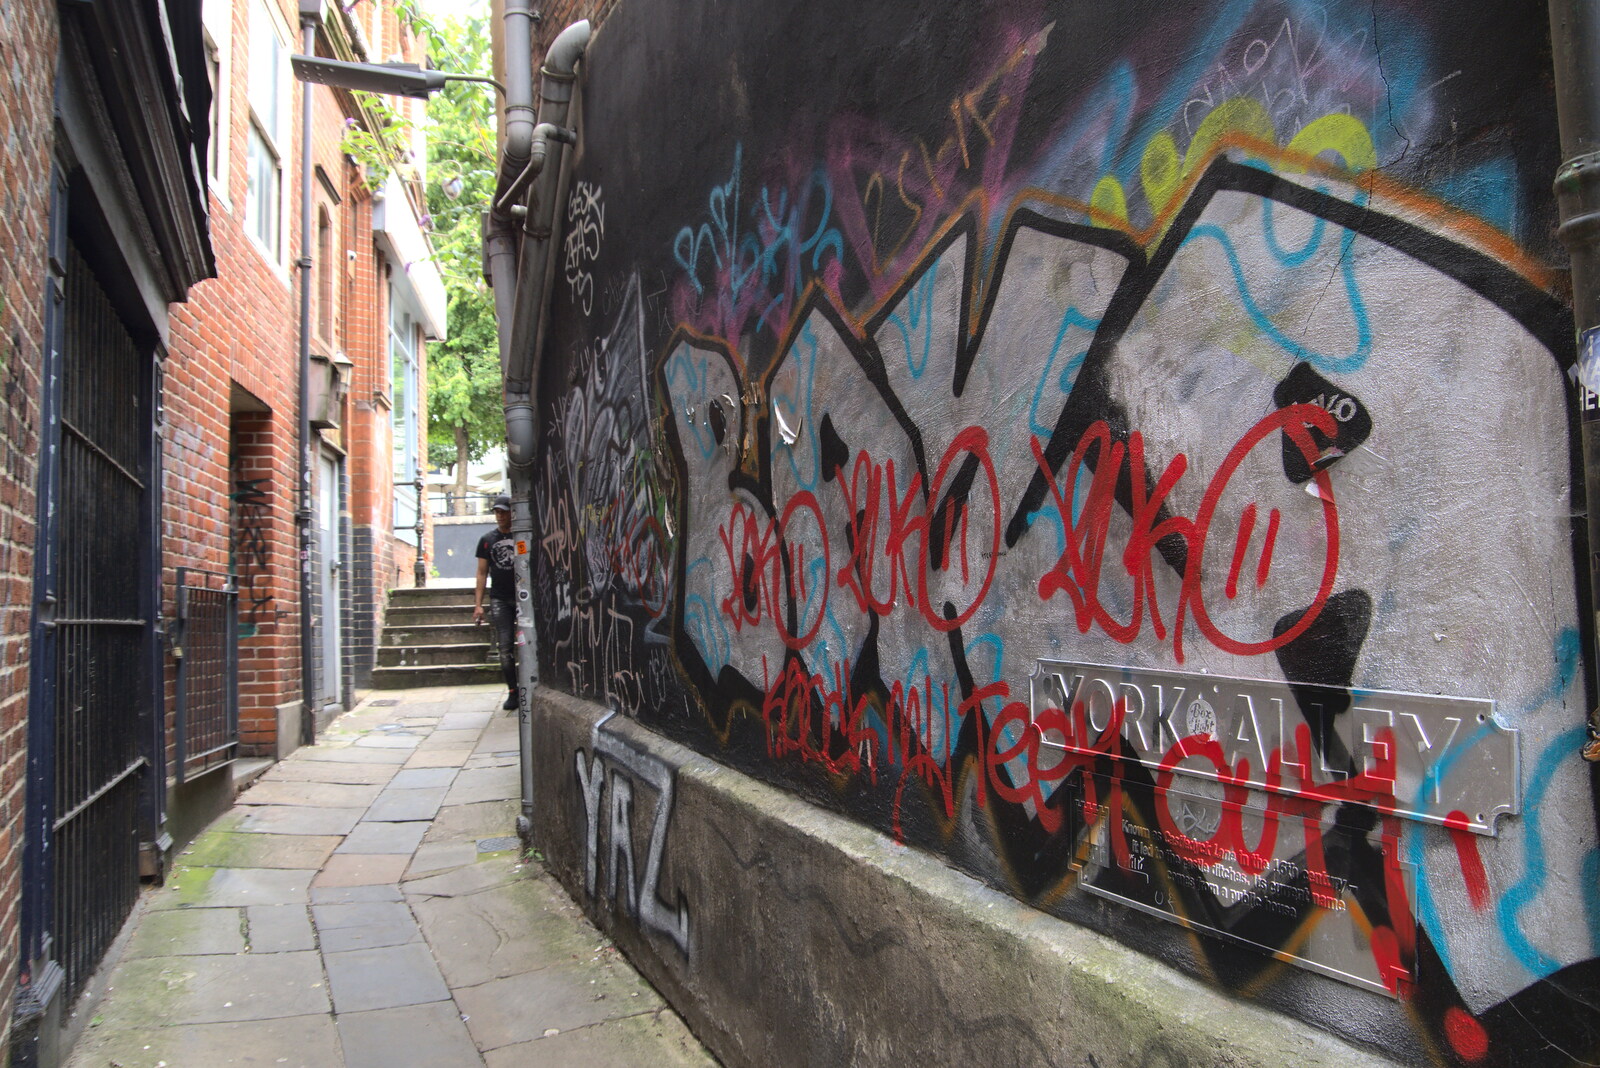 Graffiti on the wall of York Alley from Dippy and the City Dinosaur Trail, Norwich, Norfolk - 19th August 2021